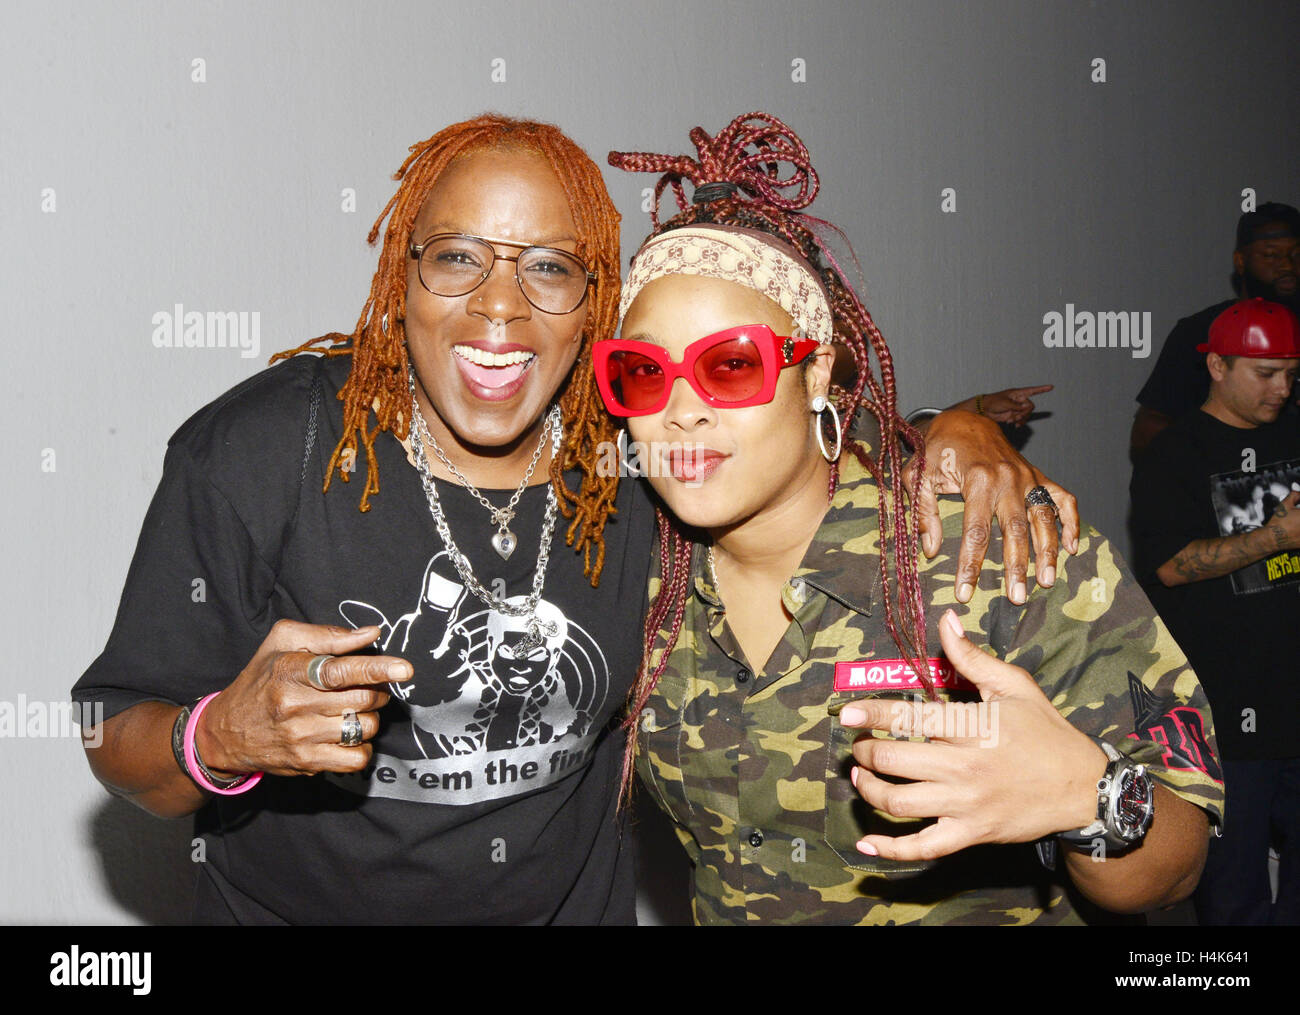 Los Angeles, Ca, USA. 16th Oct, 2016. Rapper Da Brat attends the 'Queen of The Ring' Rap Battle at Ben Kitay Studios in Los Angeles, California on October 16, 2016. Credit:  Koi Sojer/Snap'n U Photos/Media Punch/Alamy Live News Stock Photo